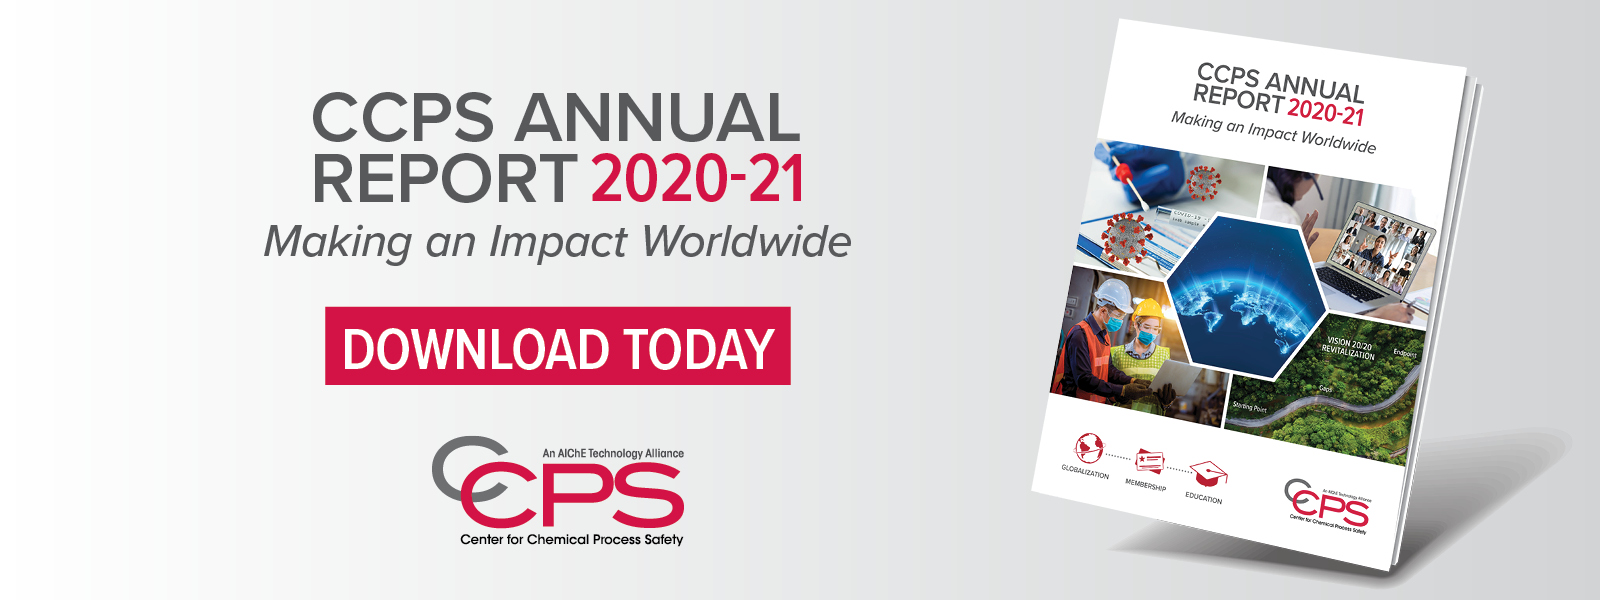 2020 CCPS Annual Report